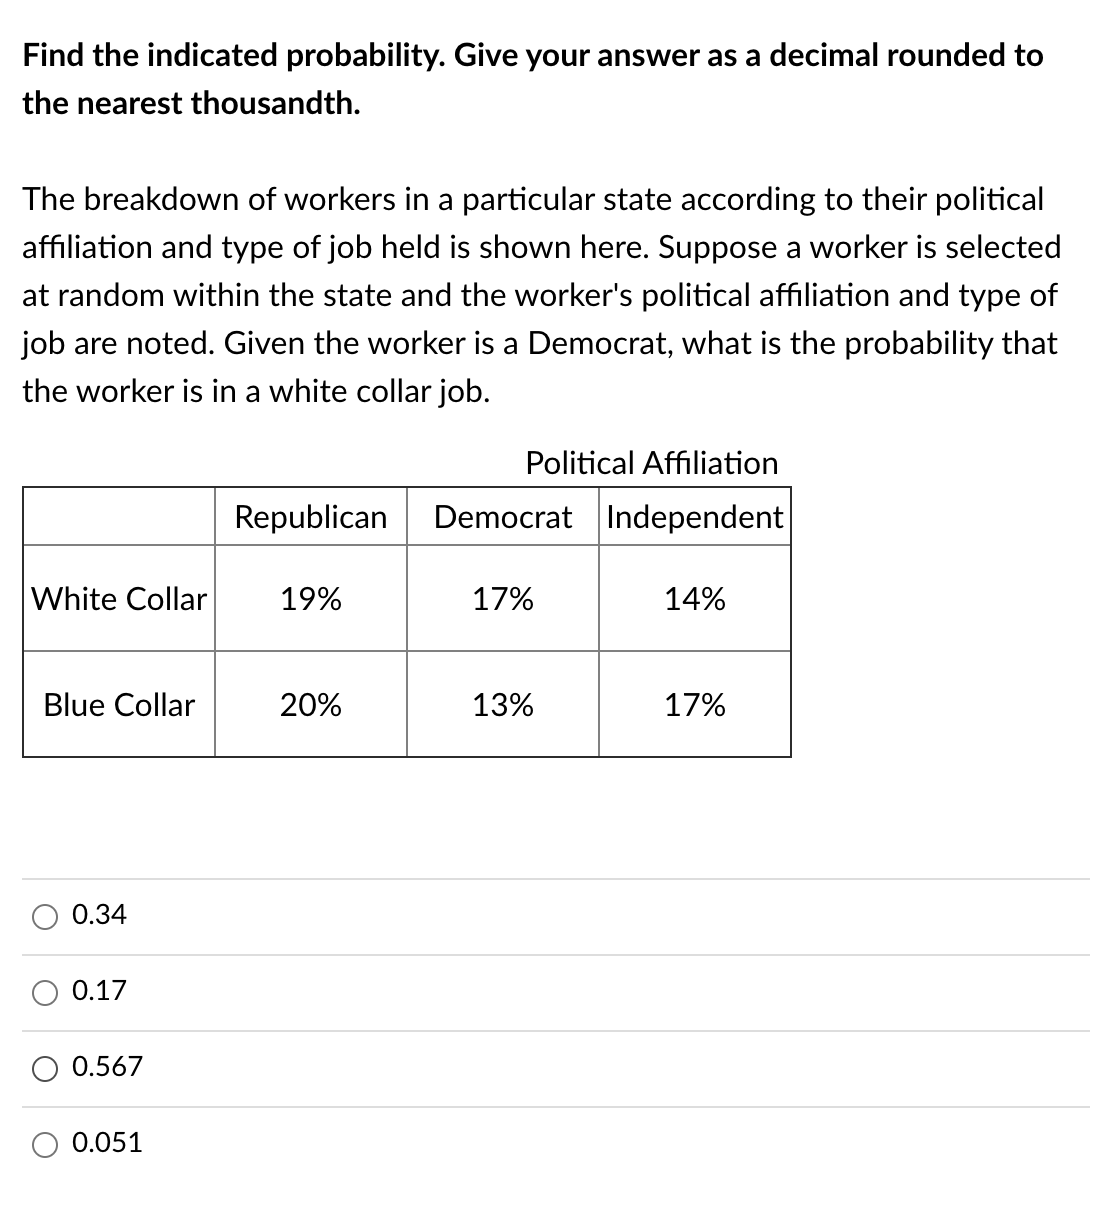 Find the indicated probability. Give your answer as a decimal rounded to
the nearest thousandth.
The breakdown of workers in a particular state according to their political
affiliation and type of job held is shown here. Suppose a worker is selected
at random within the state and the worker's political affiliation and type of
job are noted. Given the worker is a Democrat, what is the probability that
the worker is in a white collar job.
Political Af
ion
Republican
Democrat Independent
White Collar
19%
17%
14%
Blue Collar
20%
13%
17%
0.34
0.17
O 0.567
0.051
